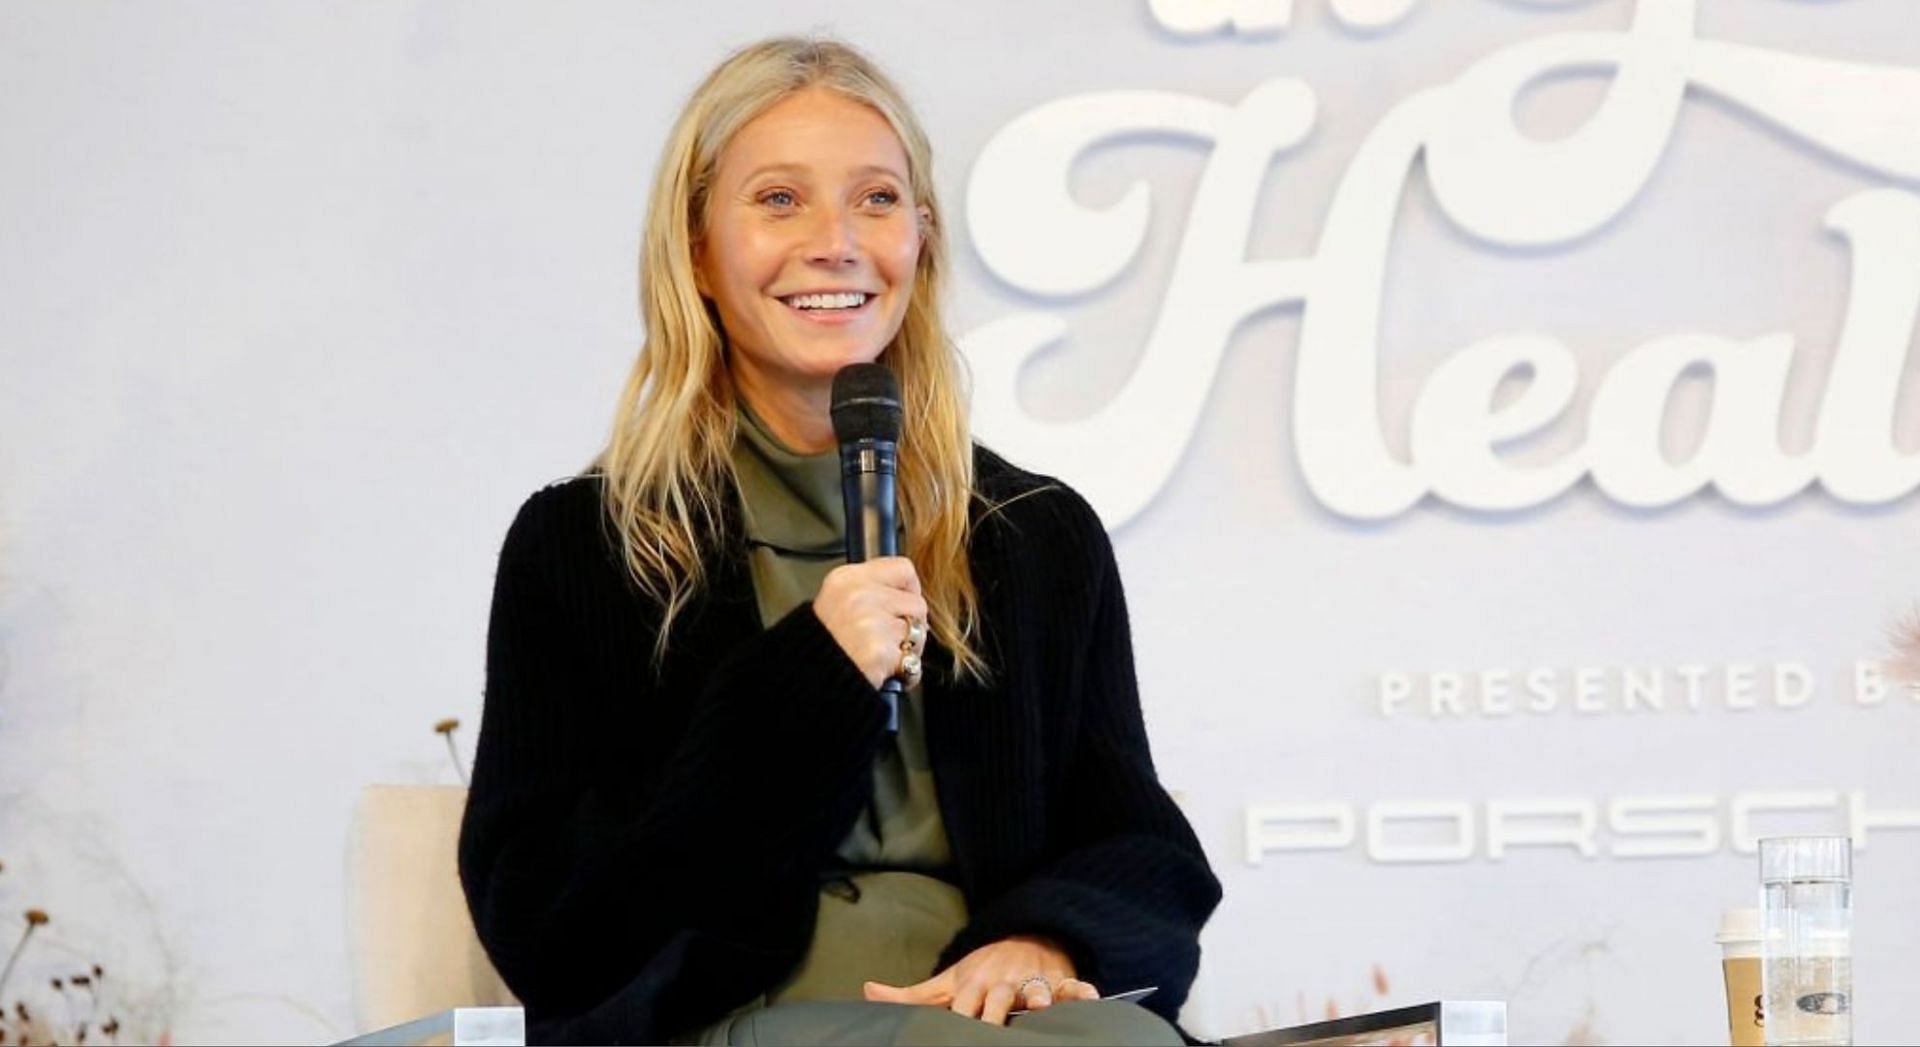 Gwyneth Paltrow addressed the backlash about her diet and wellness routine (Image via Getty Images)